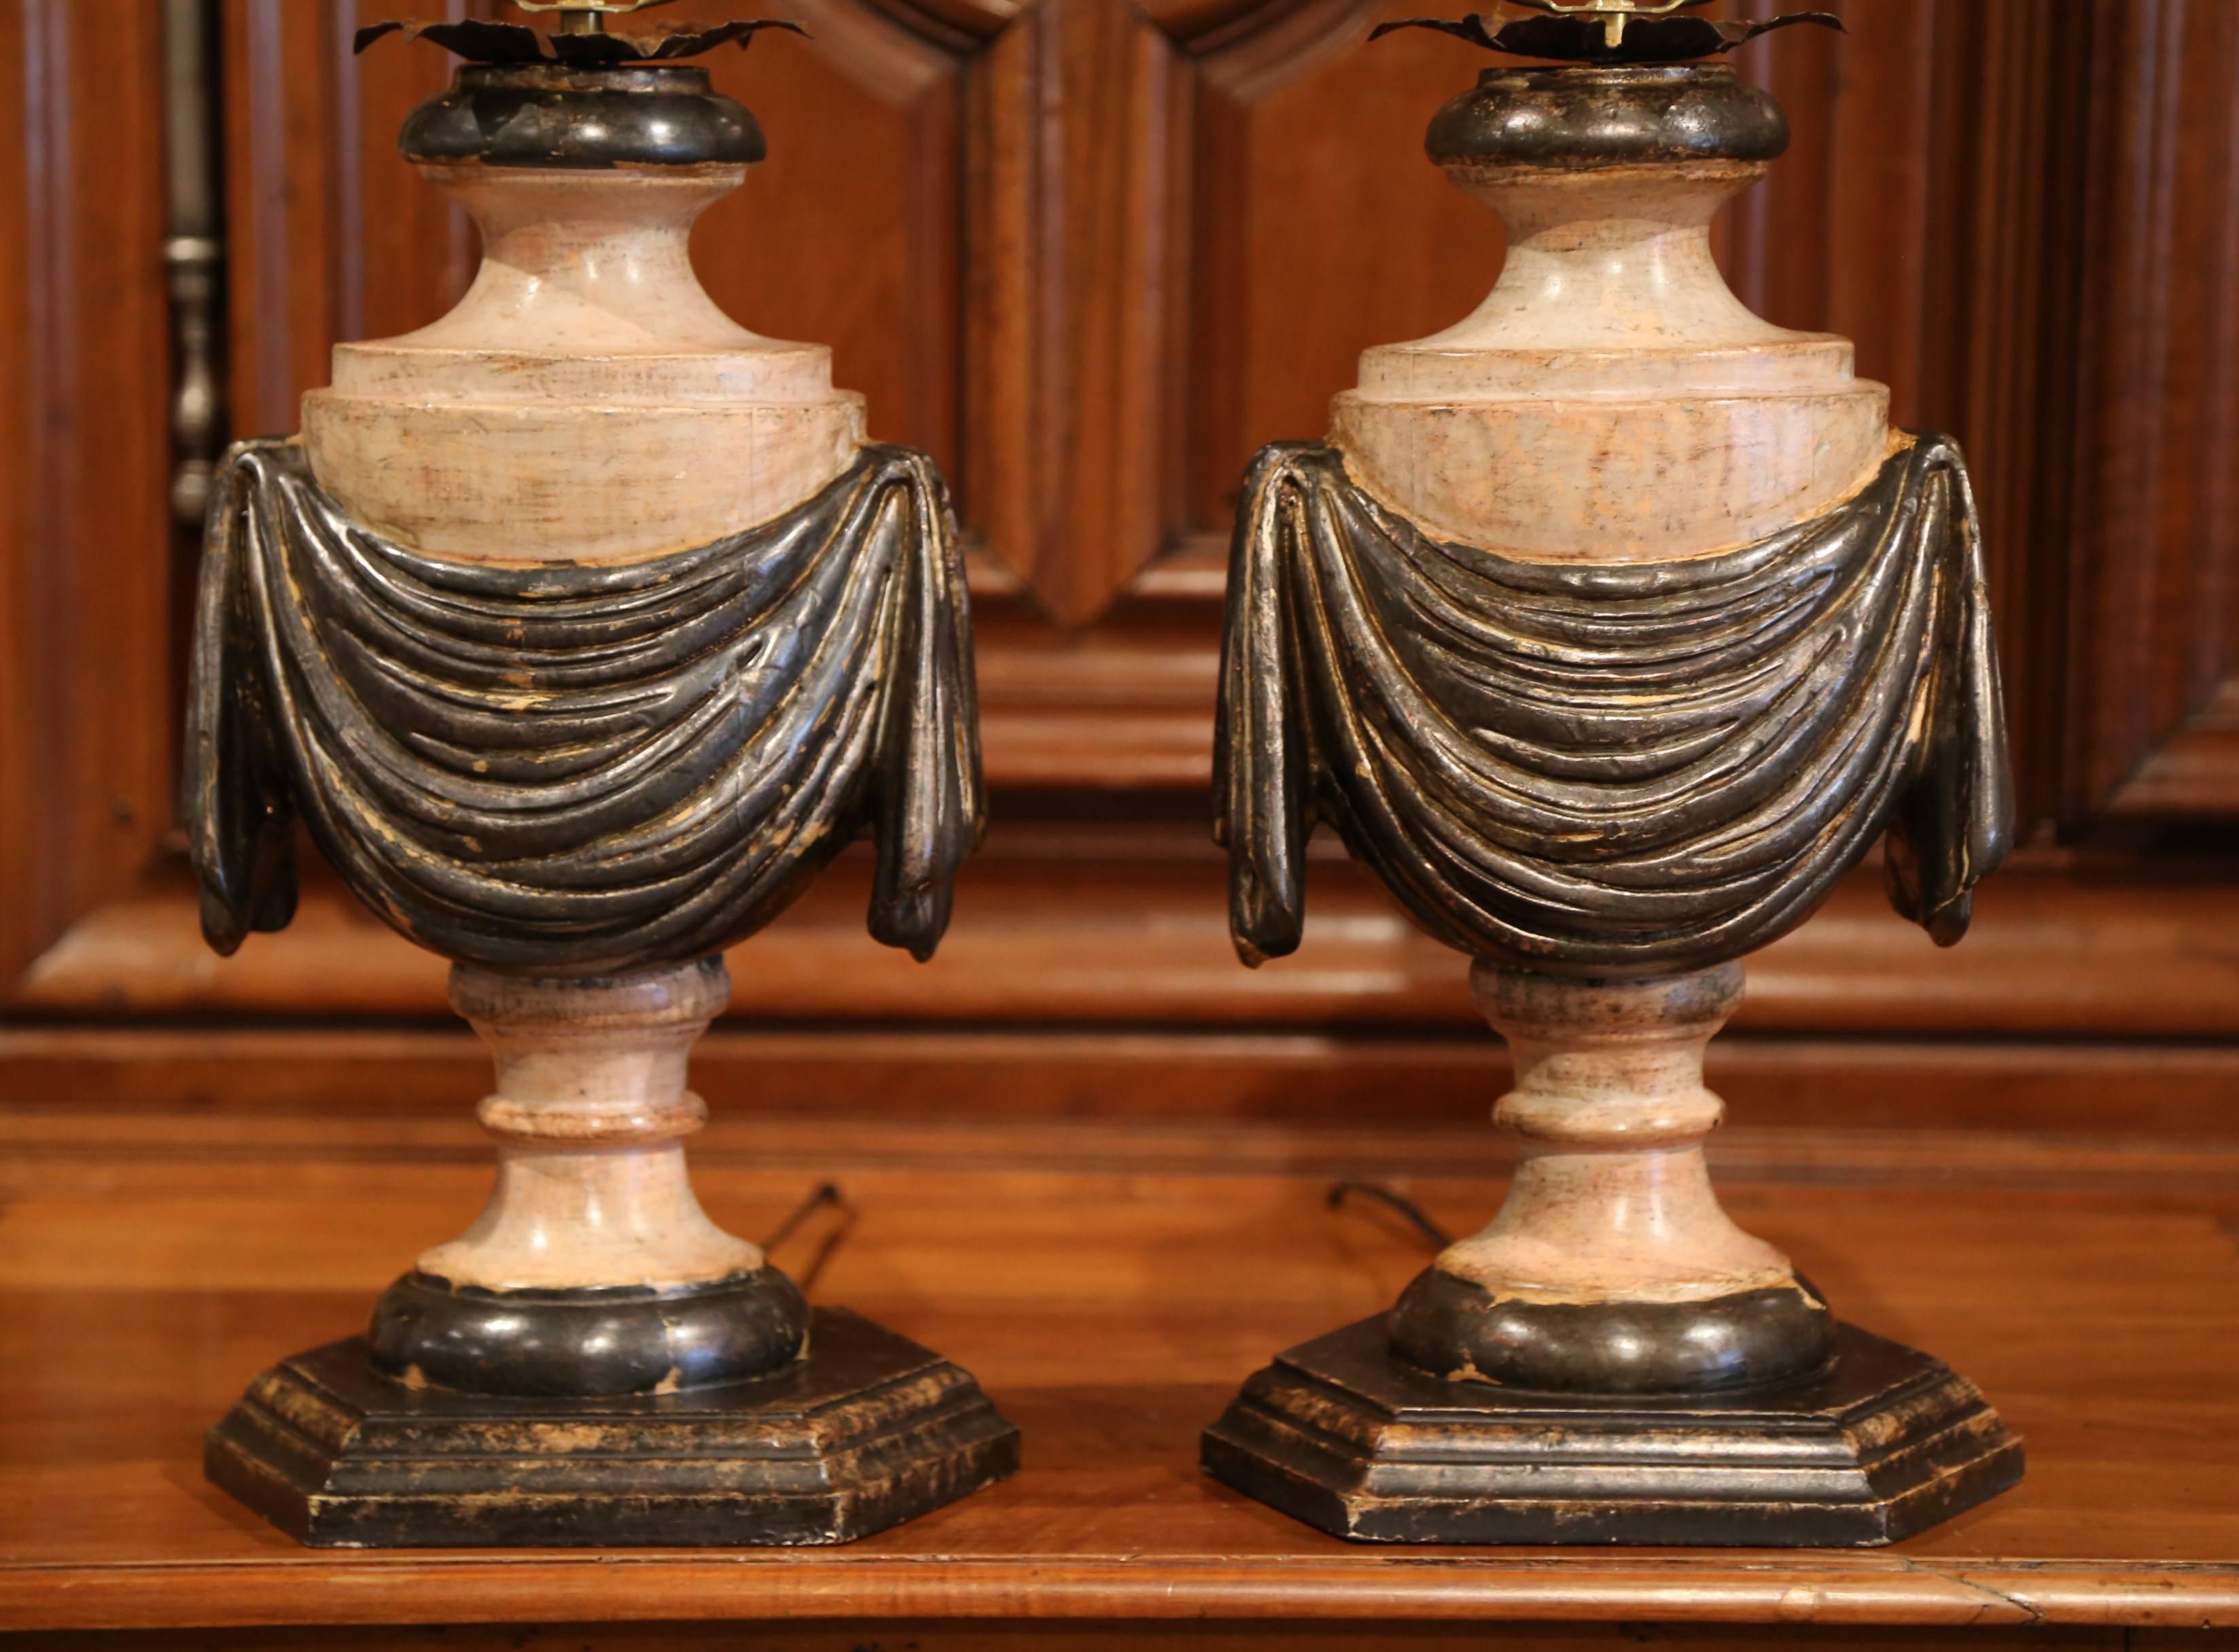 Neoclassical Pair of Italian Carved Lamp Bases with Polychrome Antique Painted Finish